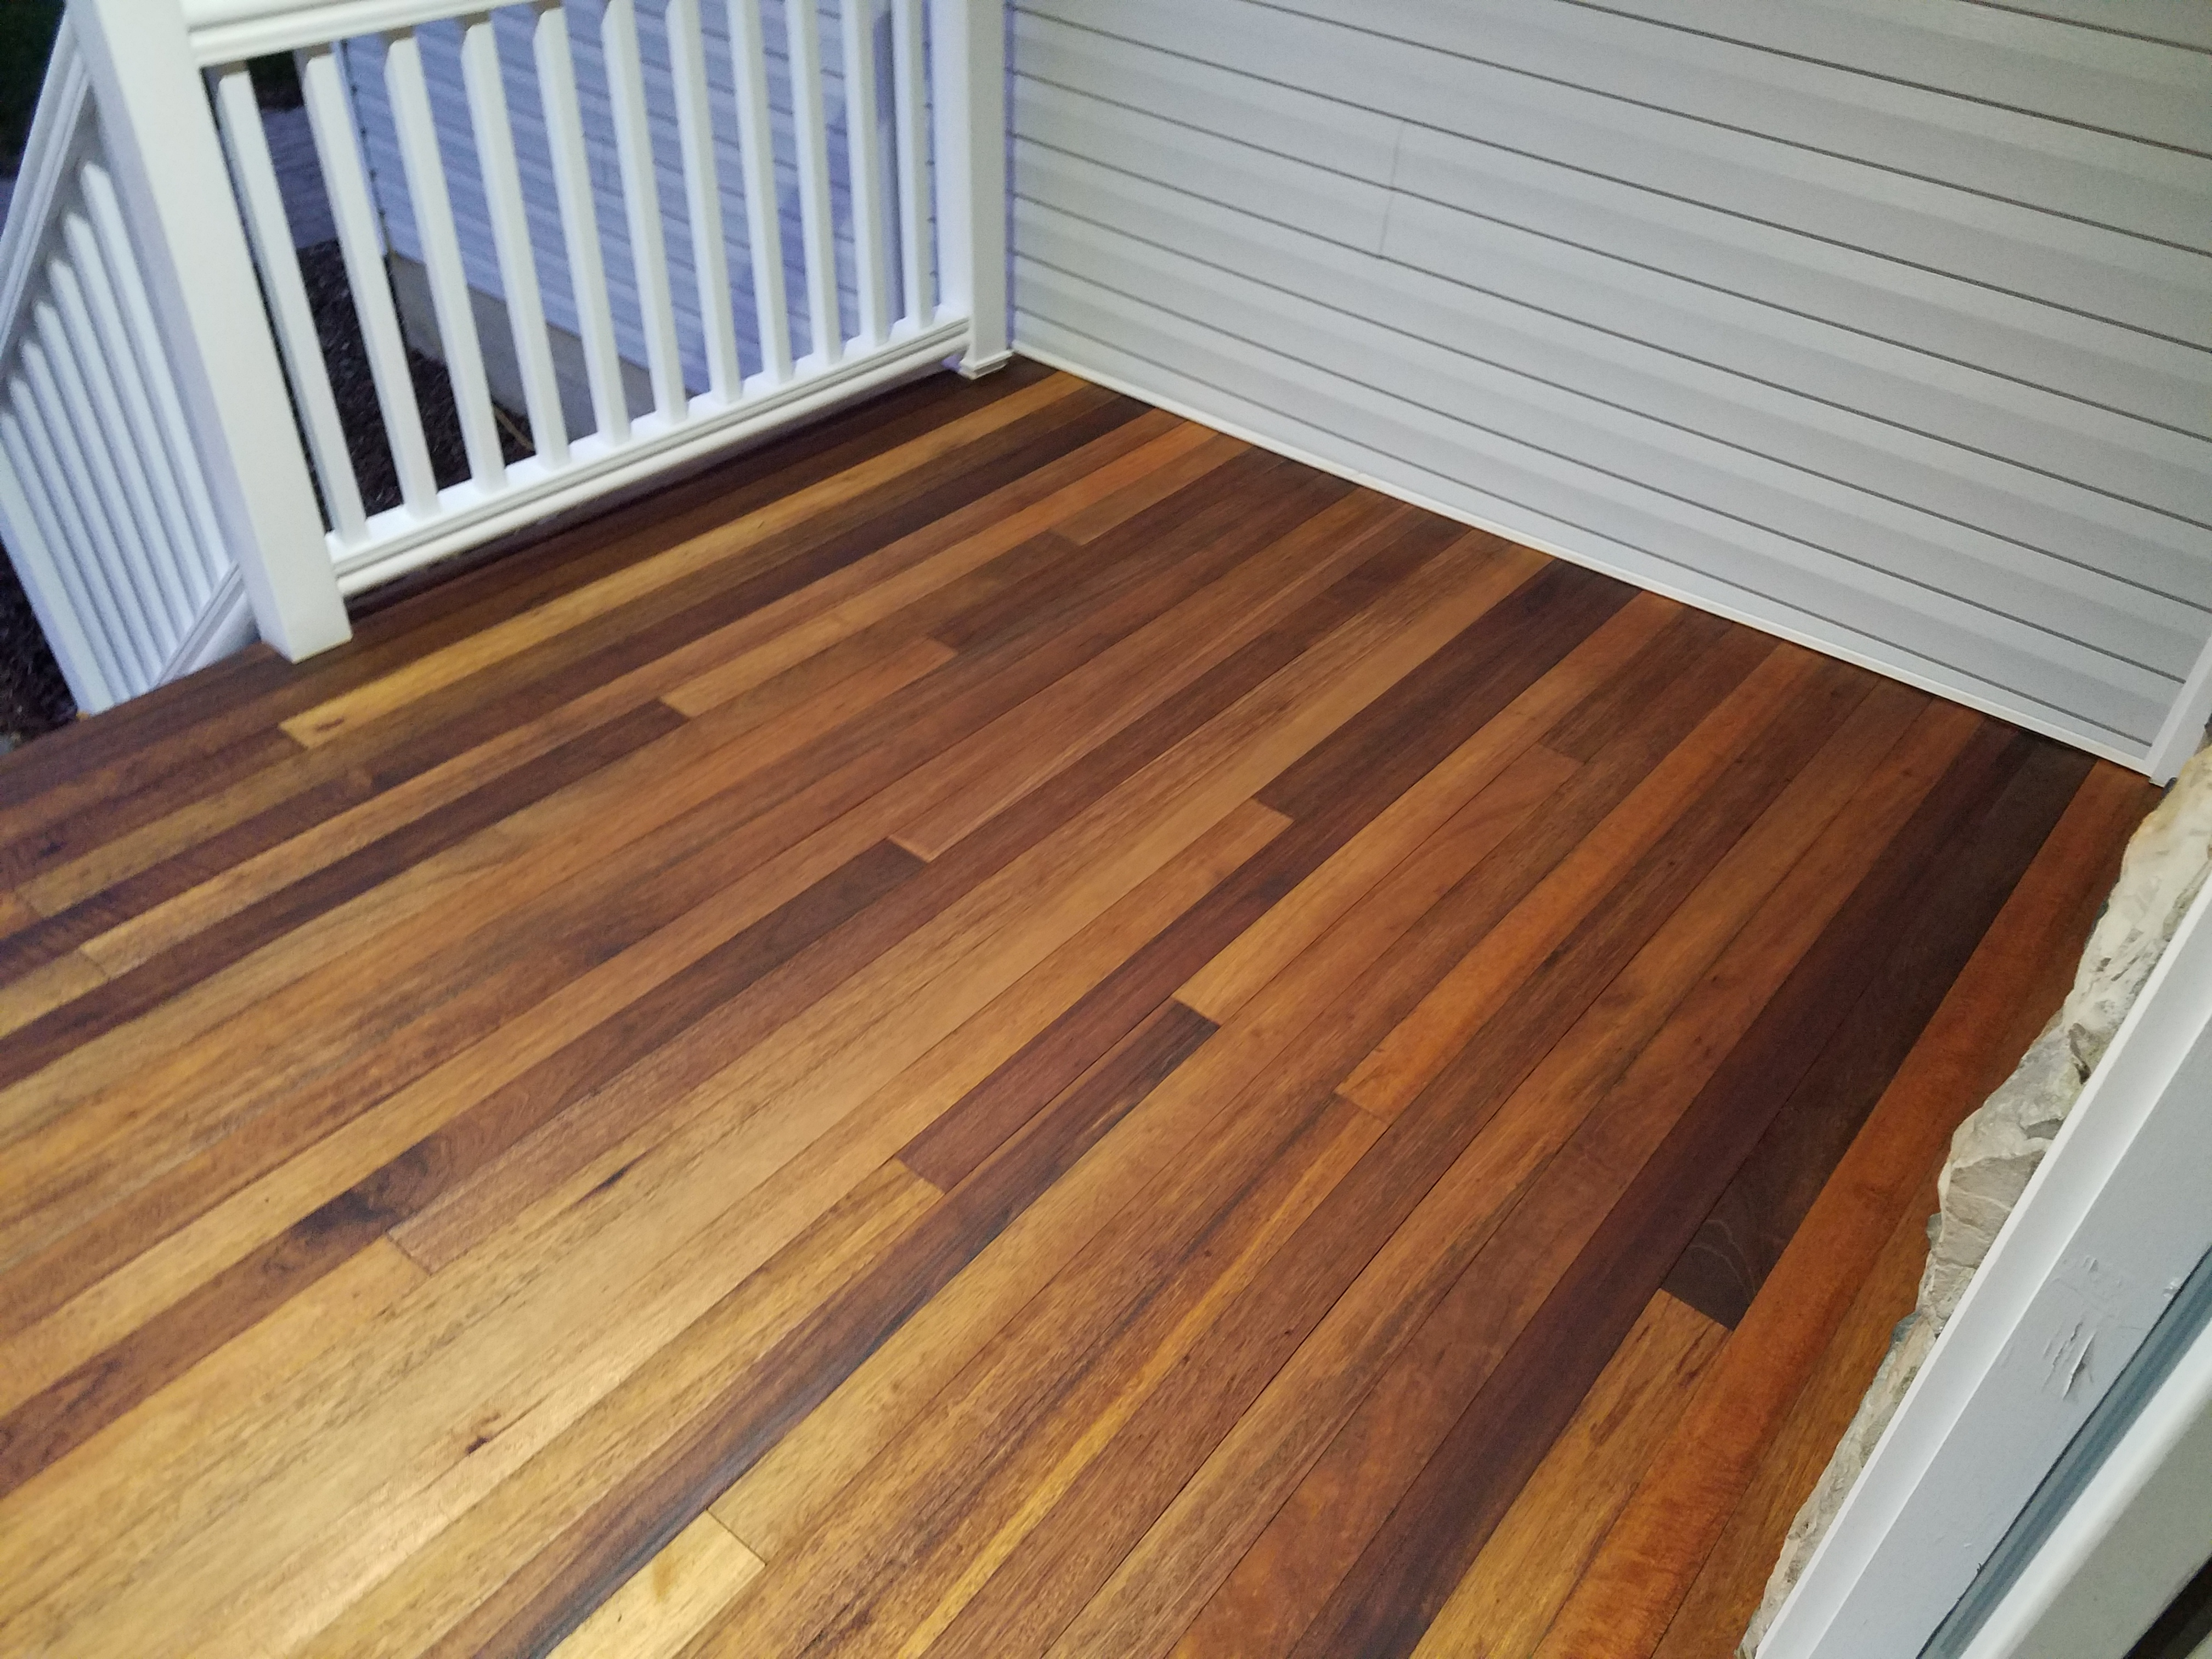 Finished Mahogany Porch With Penofin For Hardwood Deck Stain in size 4032 X 3024